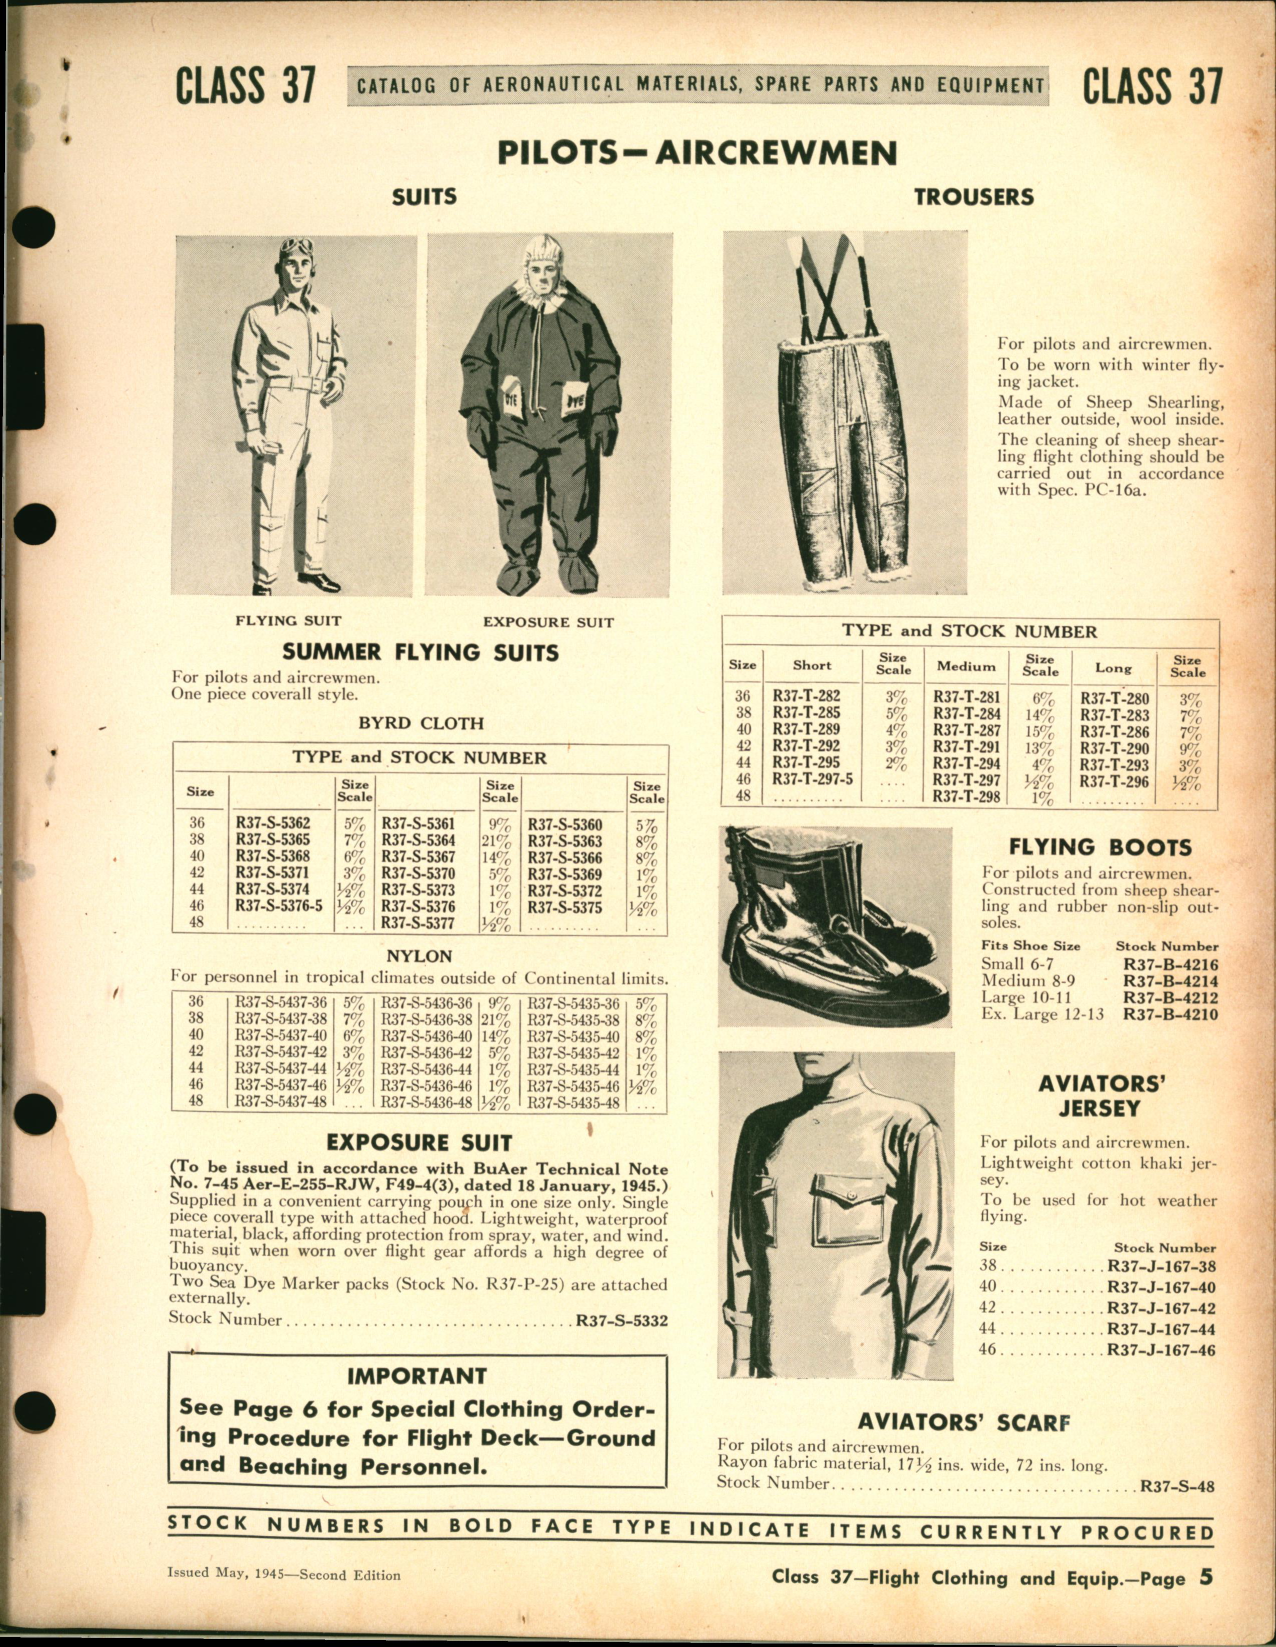 Sample page 5 from AirCorps Library document: Pilots' and Aircrewmen's Flight Clothing and Related Accessories